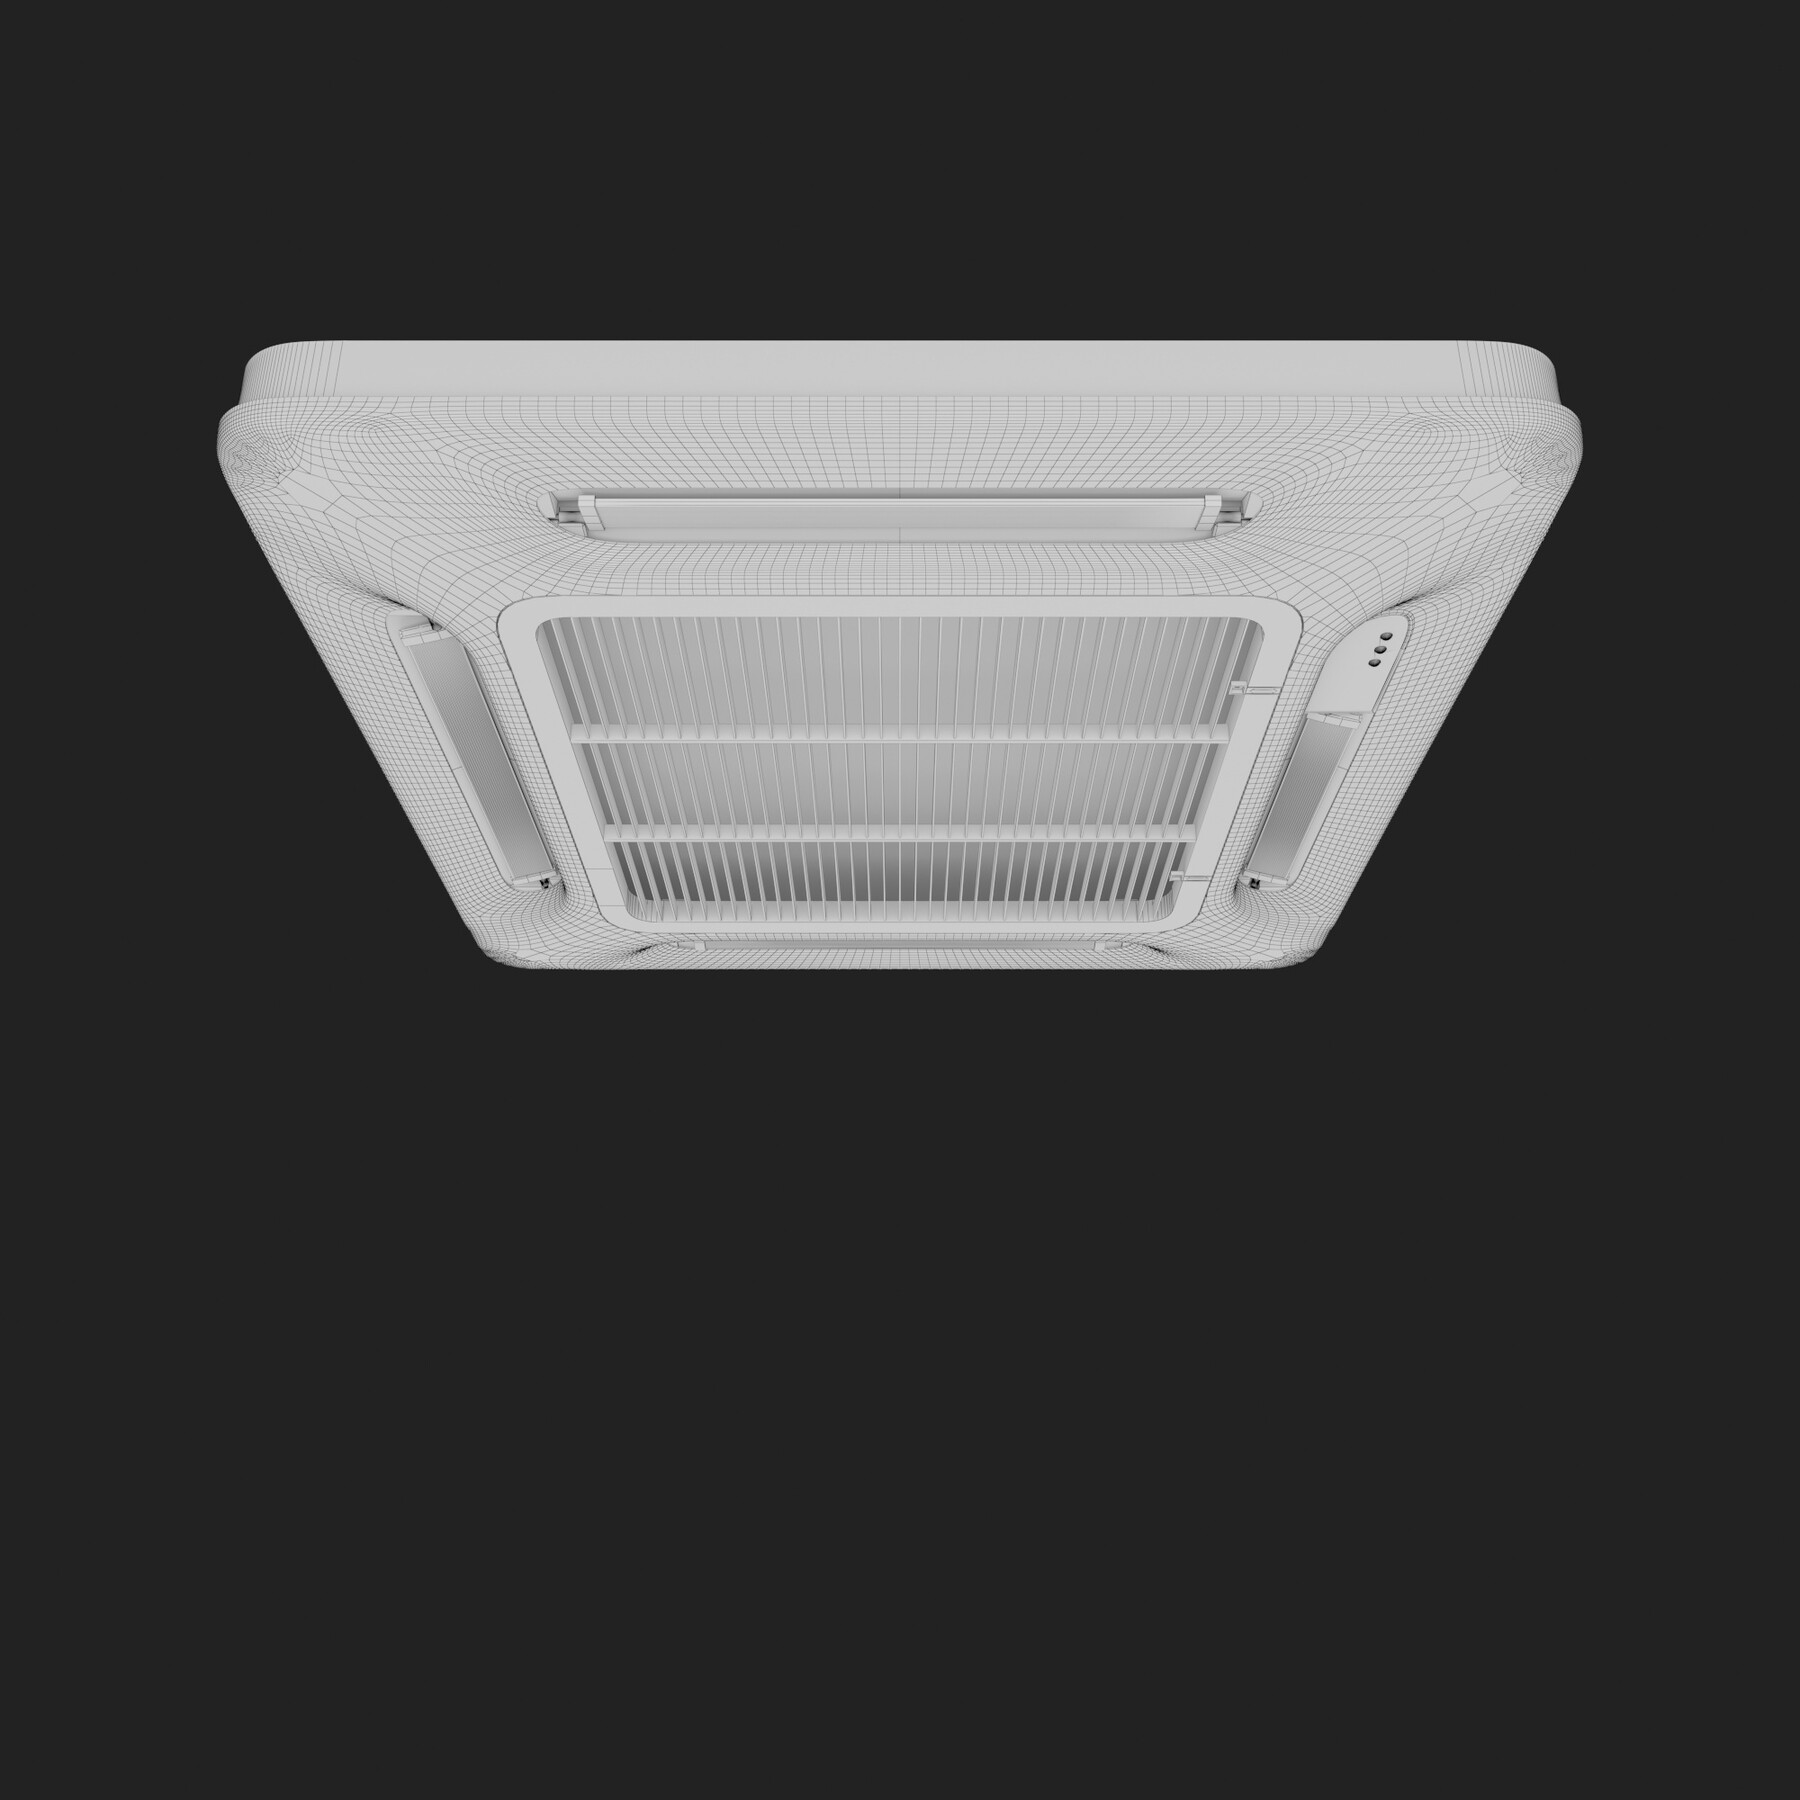 ArtStation - Celling Air Conditioner 3 | Resources